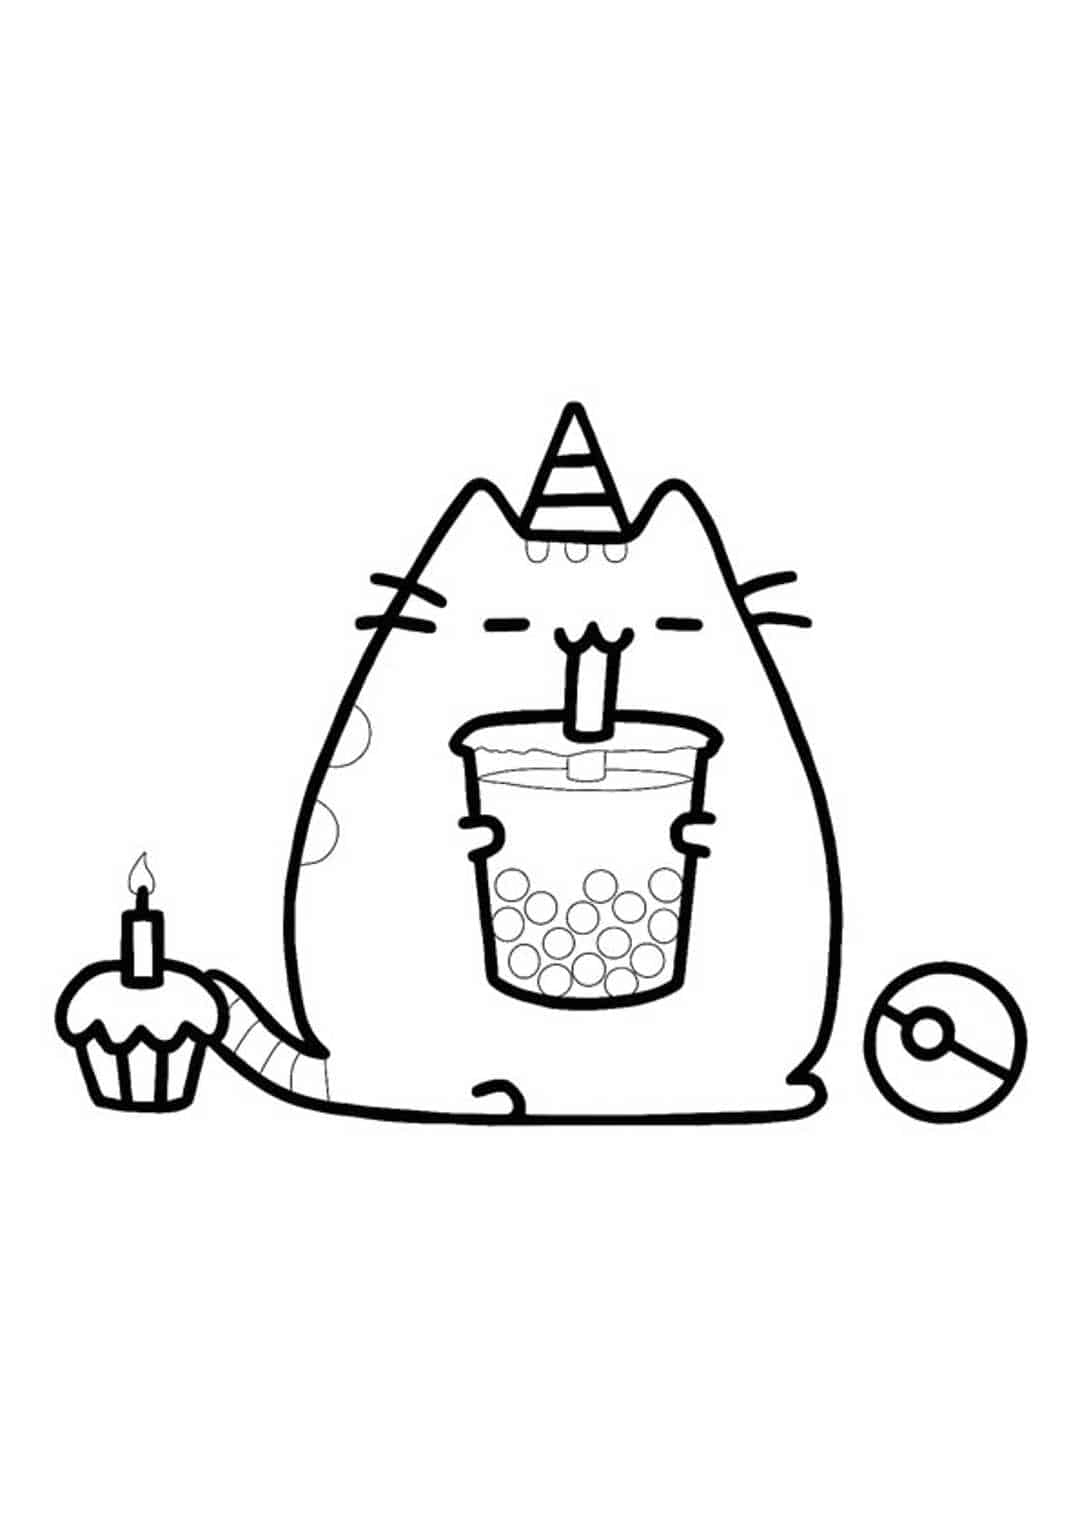  Cute Coloring Pages Boba  Best Free